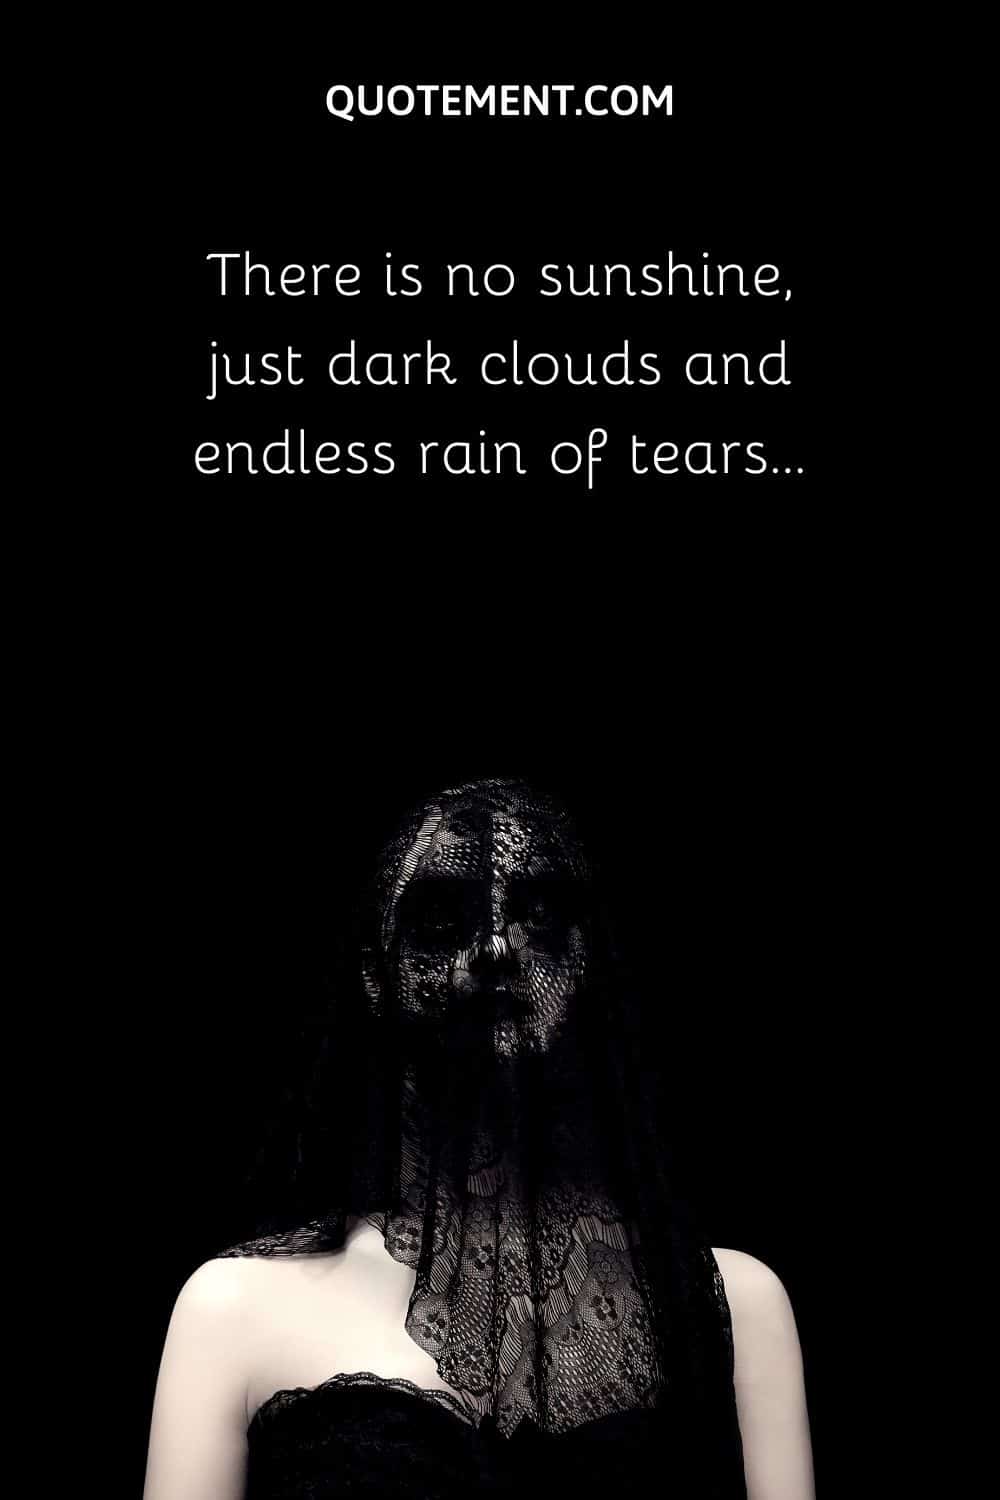 There is no sunshine